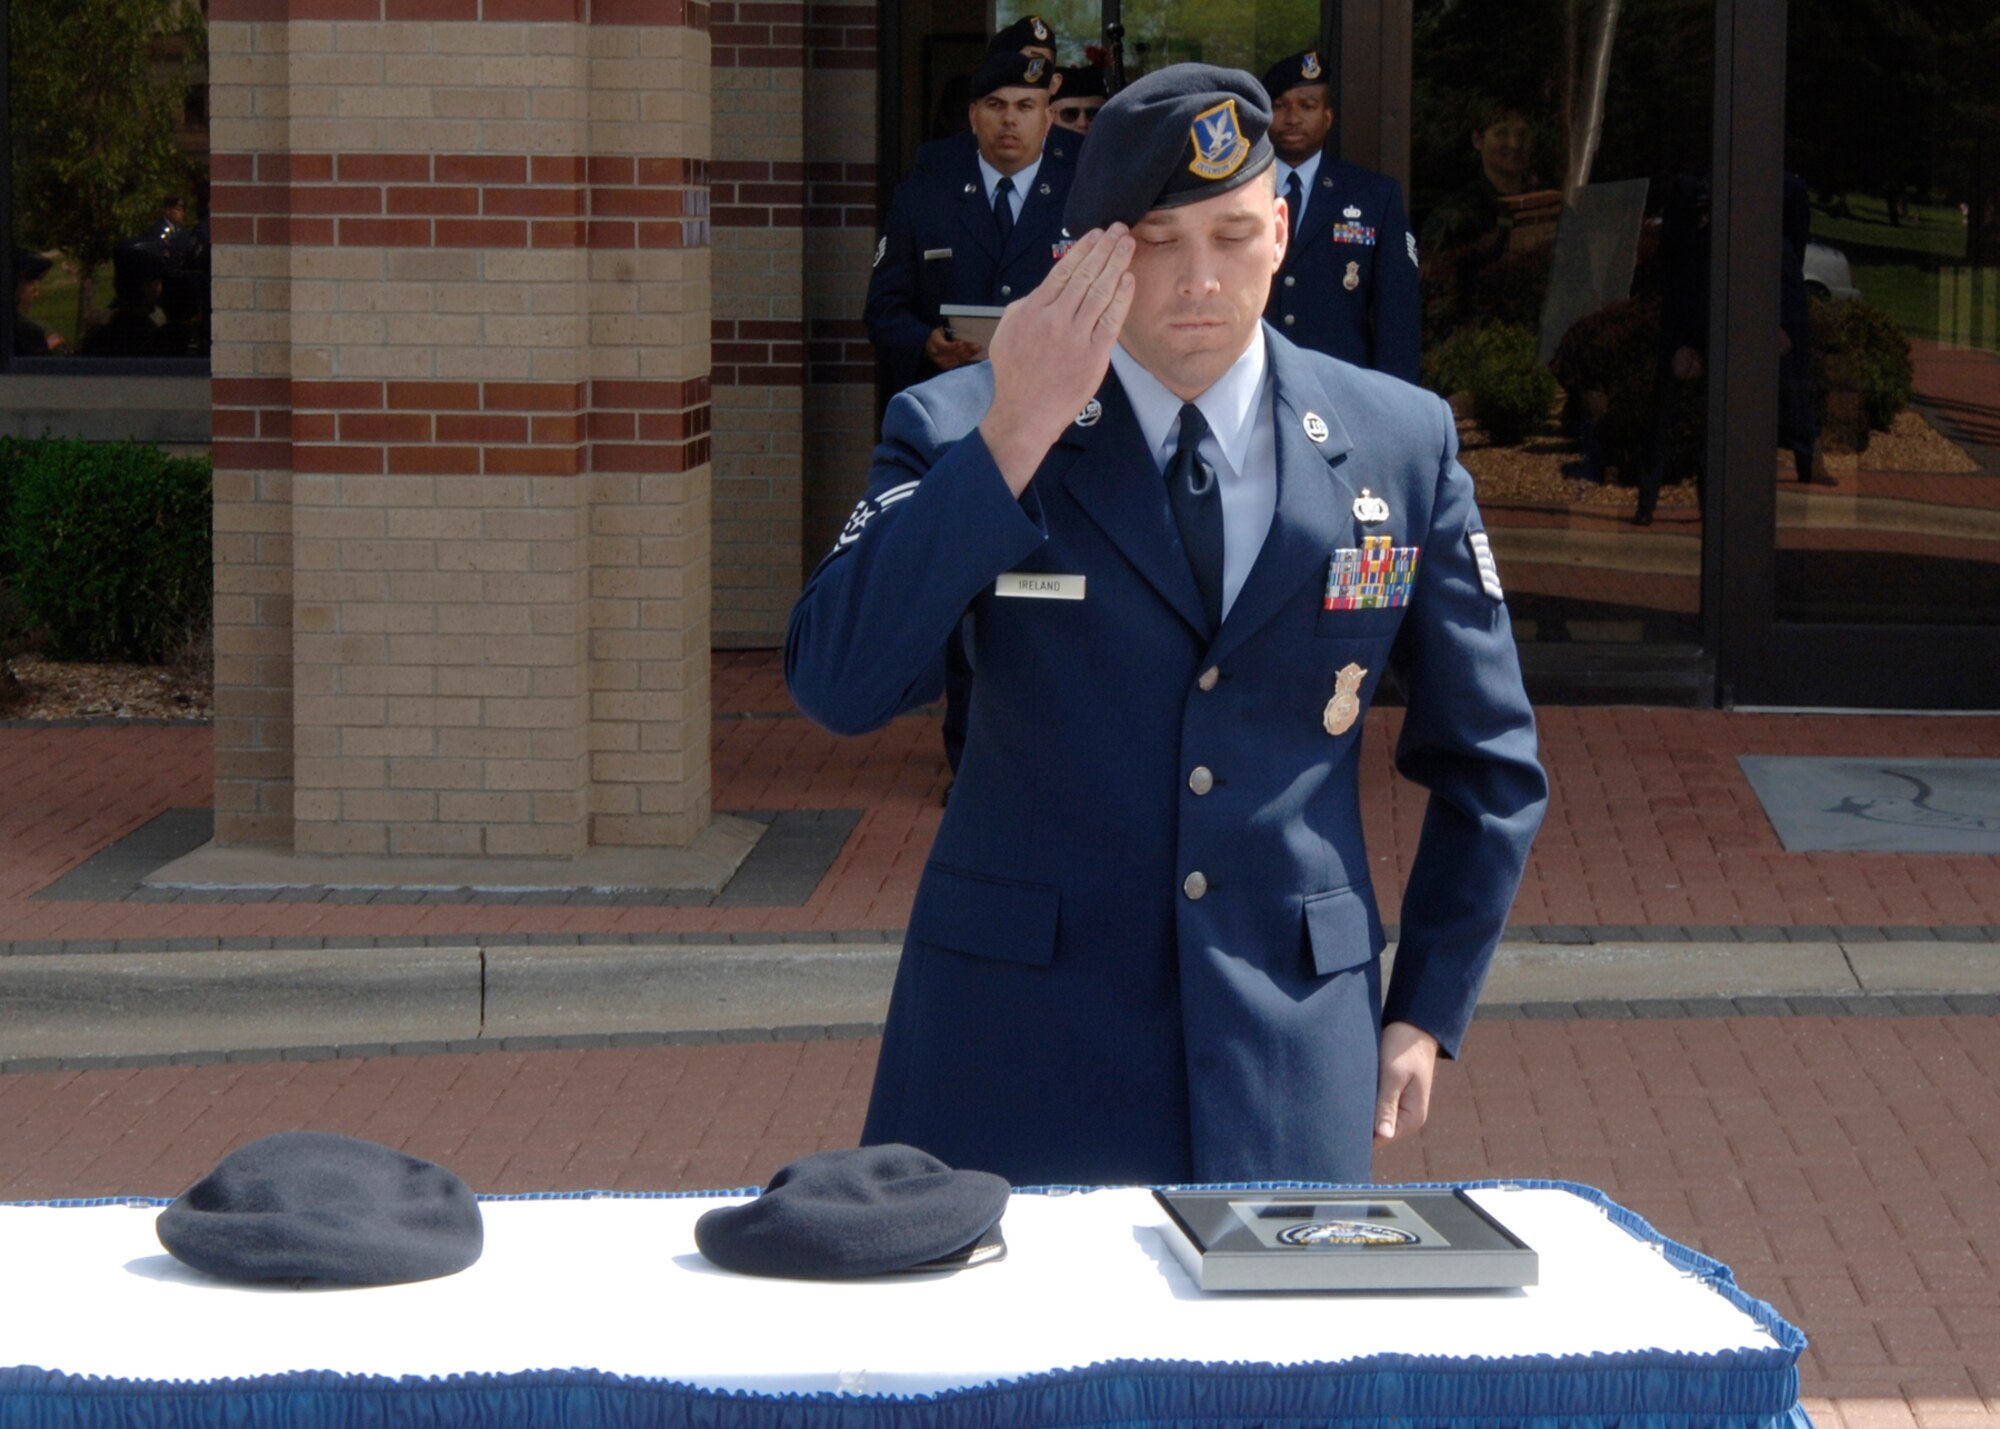 Tech. Sgt. Benjamin Ireland, 22nd Security Forces, pays respects to two fallen Air Force Security Forces members who were killed in the past year during retreat ceremony in front of Bldg. 1 May 15. This day marked the beginning of National Police Week. (Photo by Airman Justin Shelton)